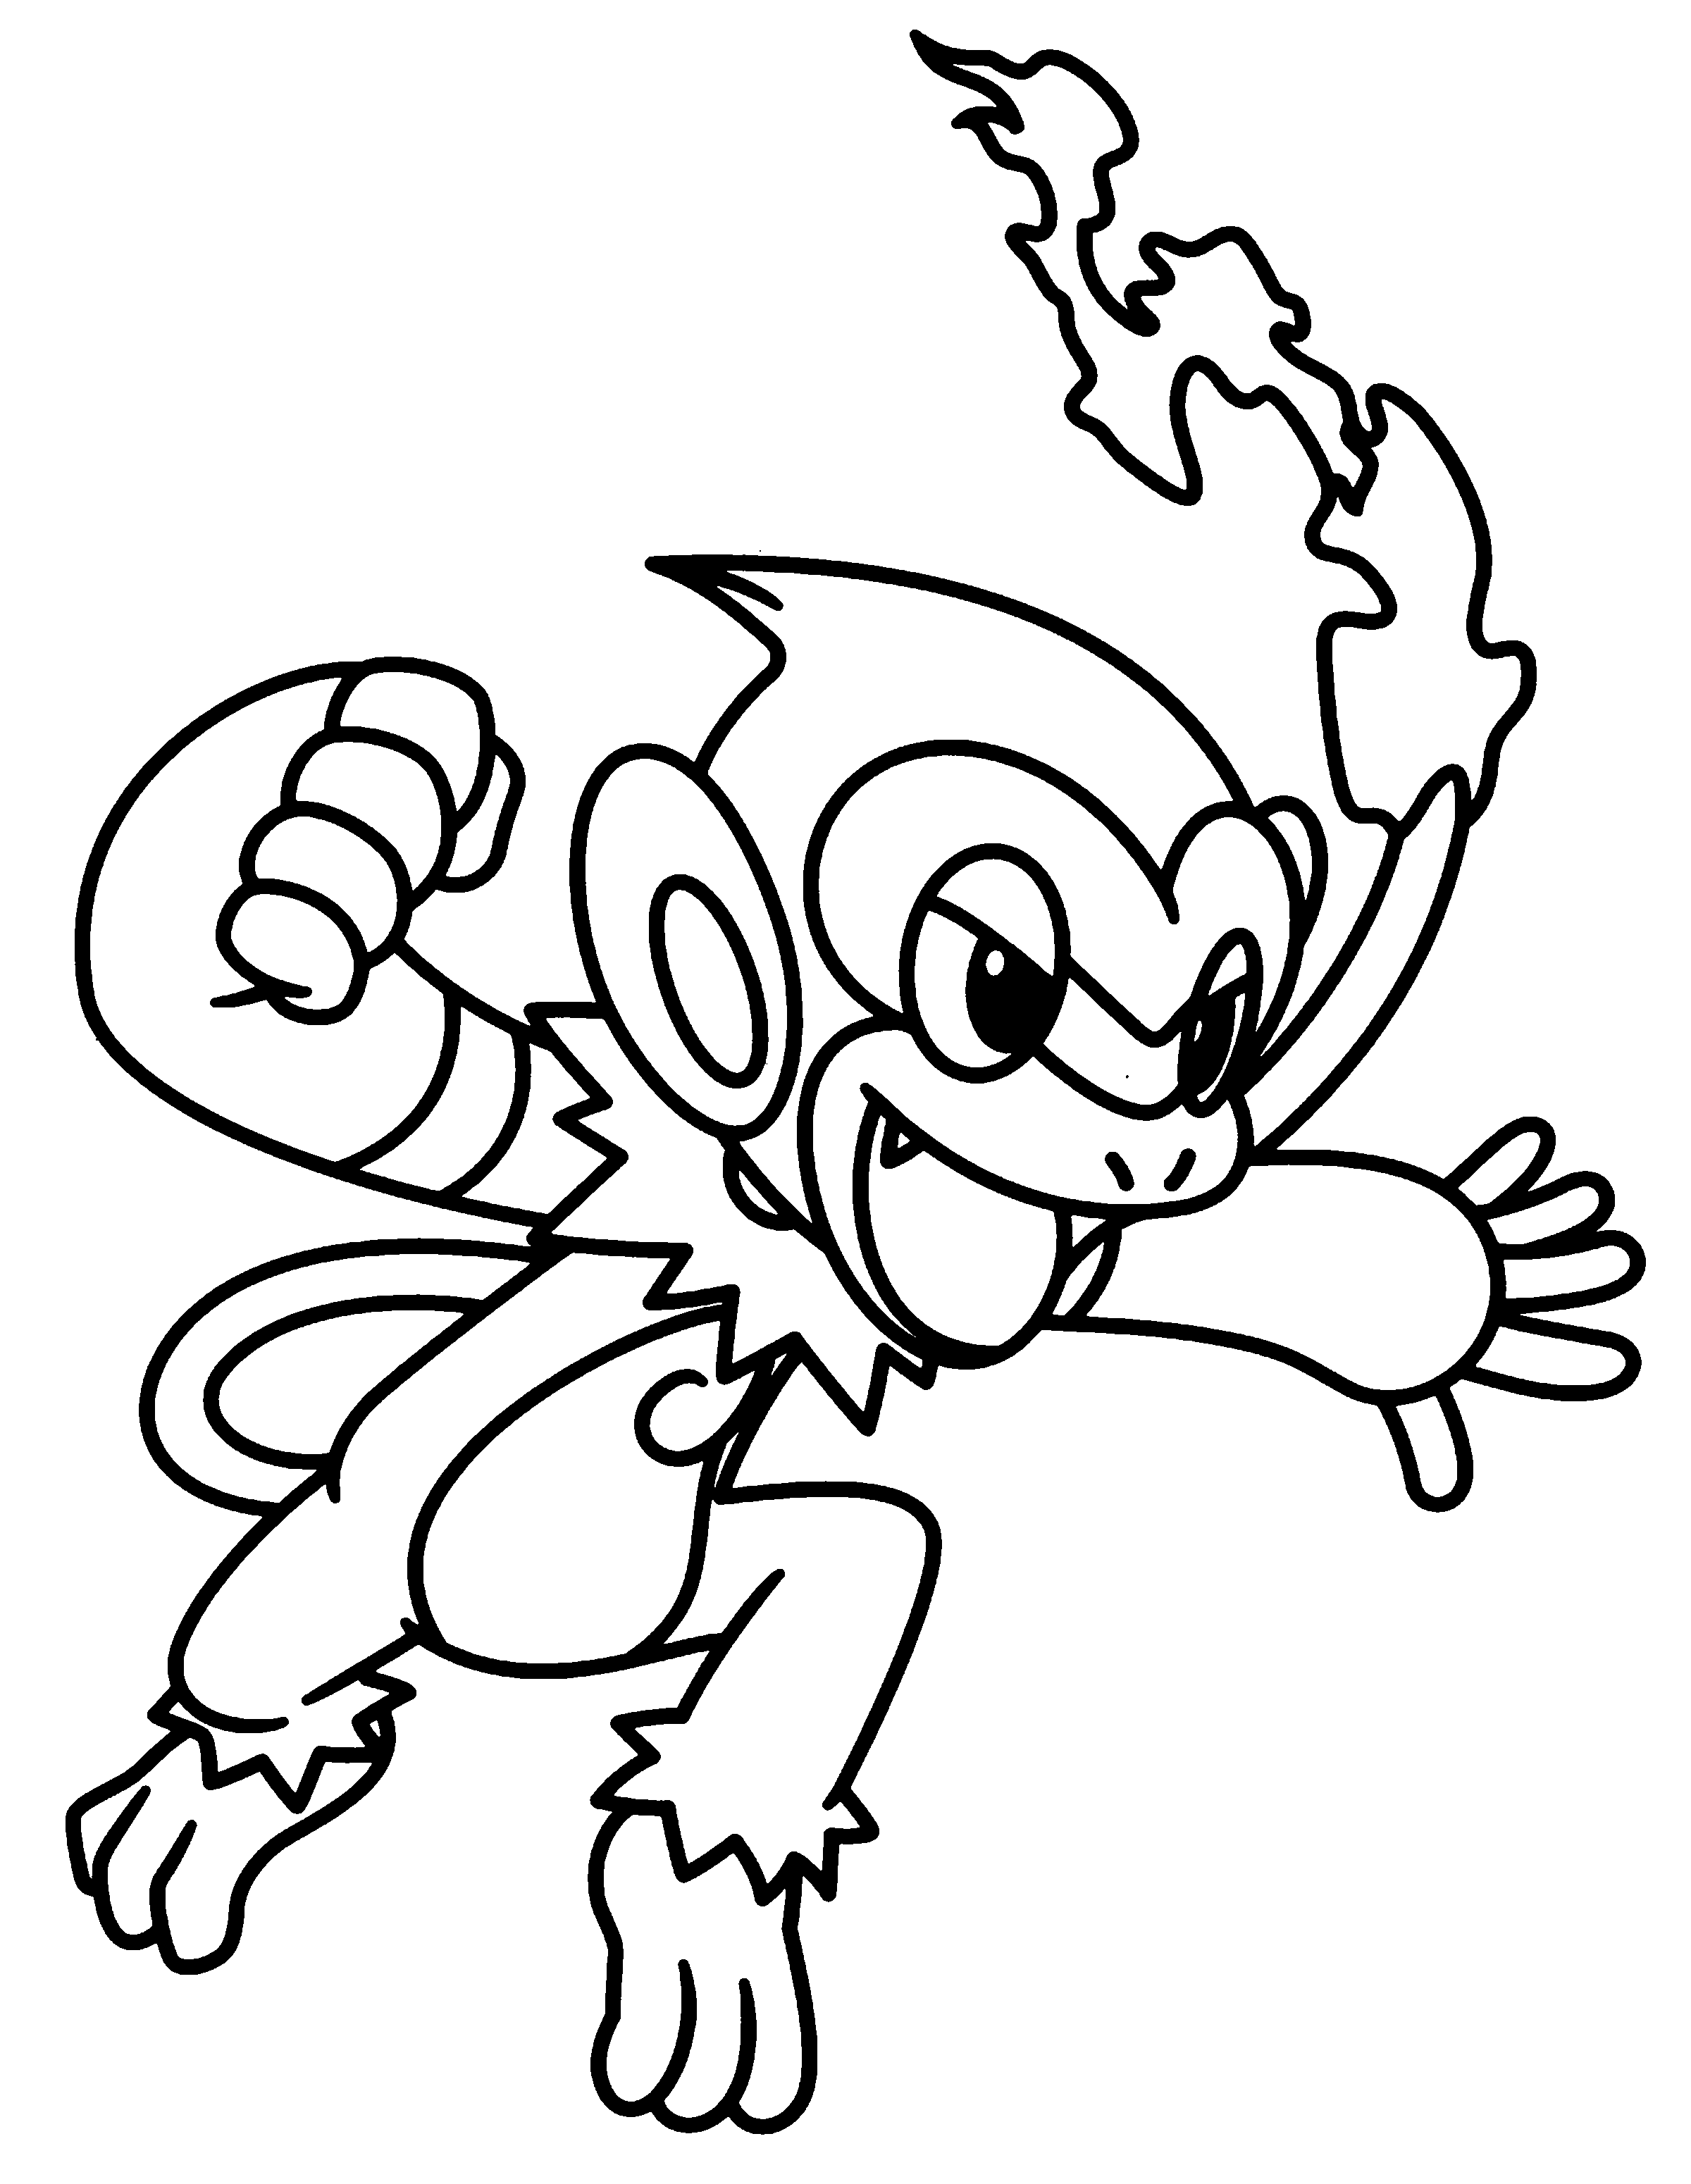 Coloring page invizimals cartoons â printable coloring pages